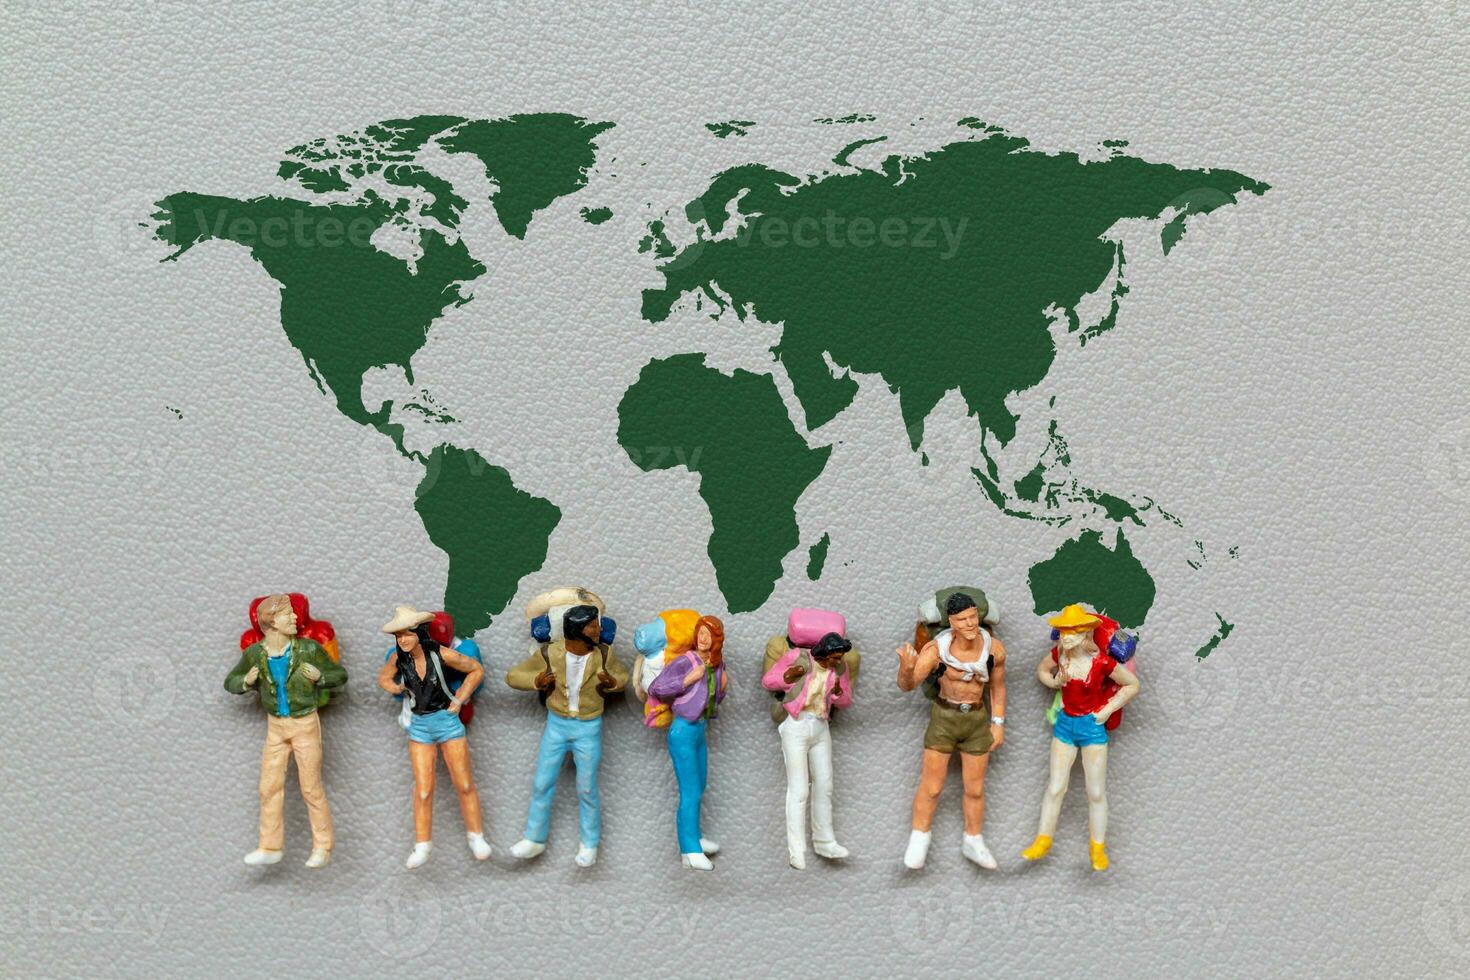 Miniature people standing on the world map with gray background photo